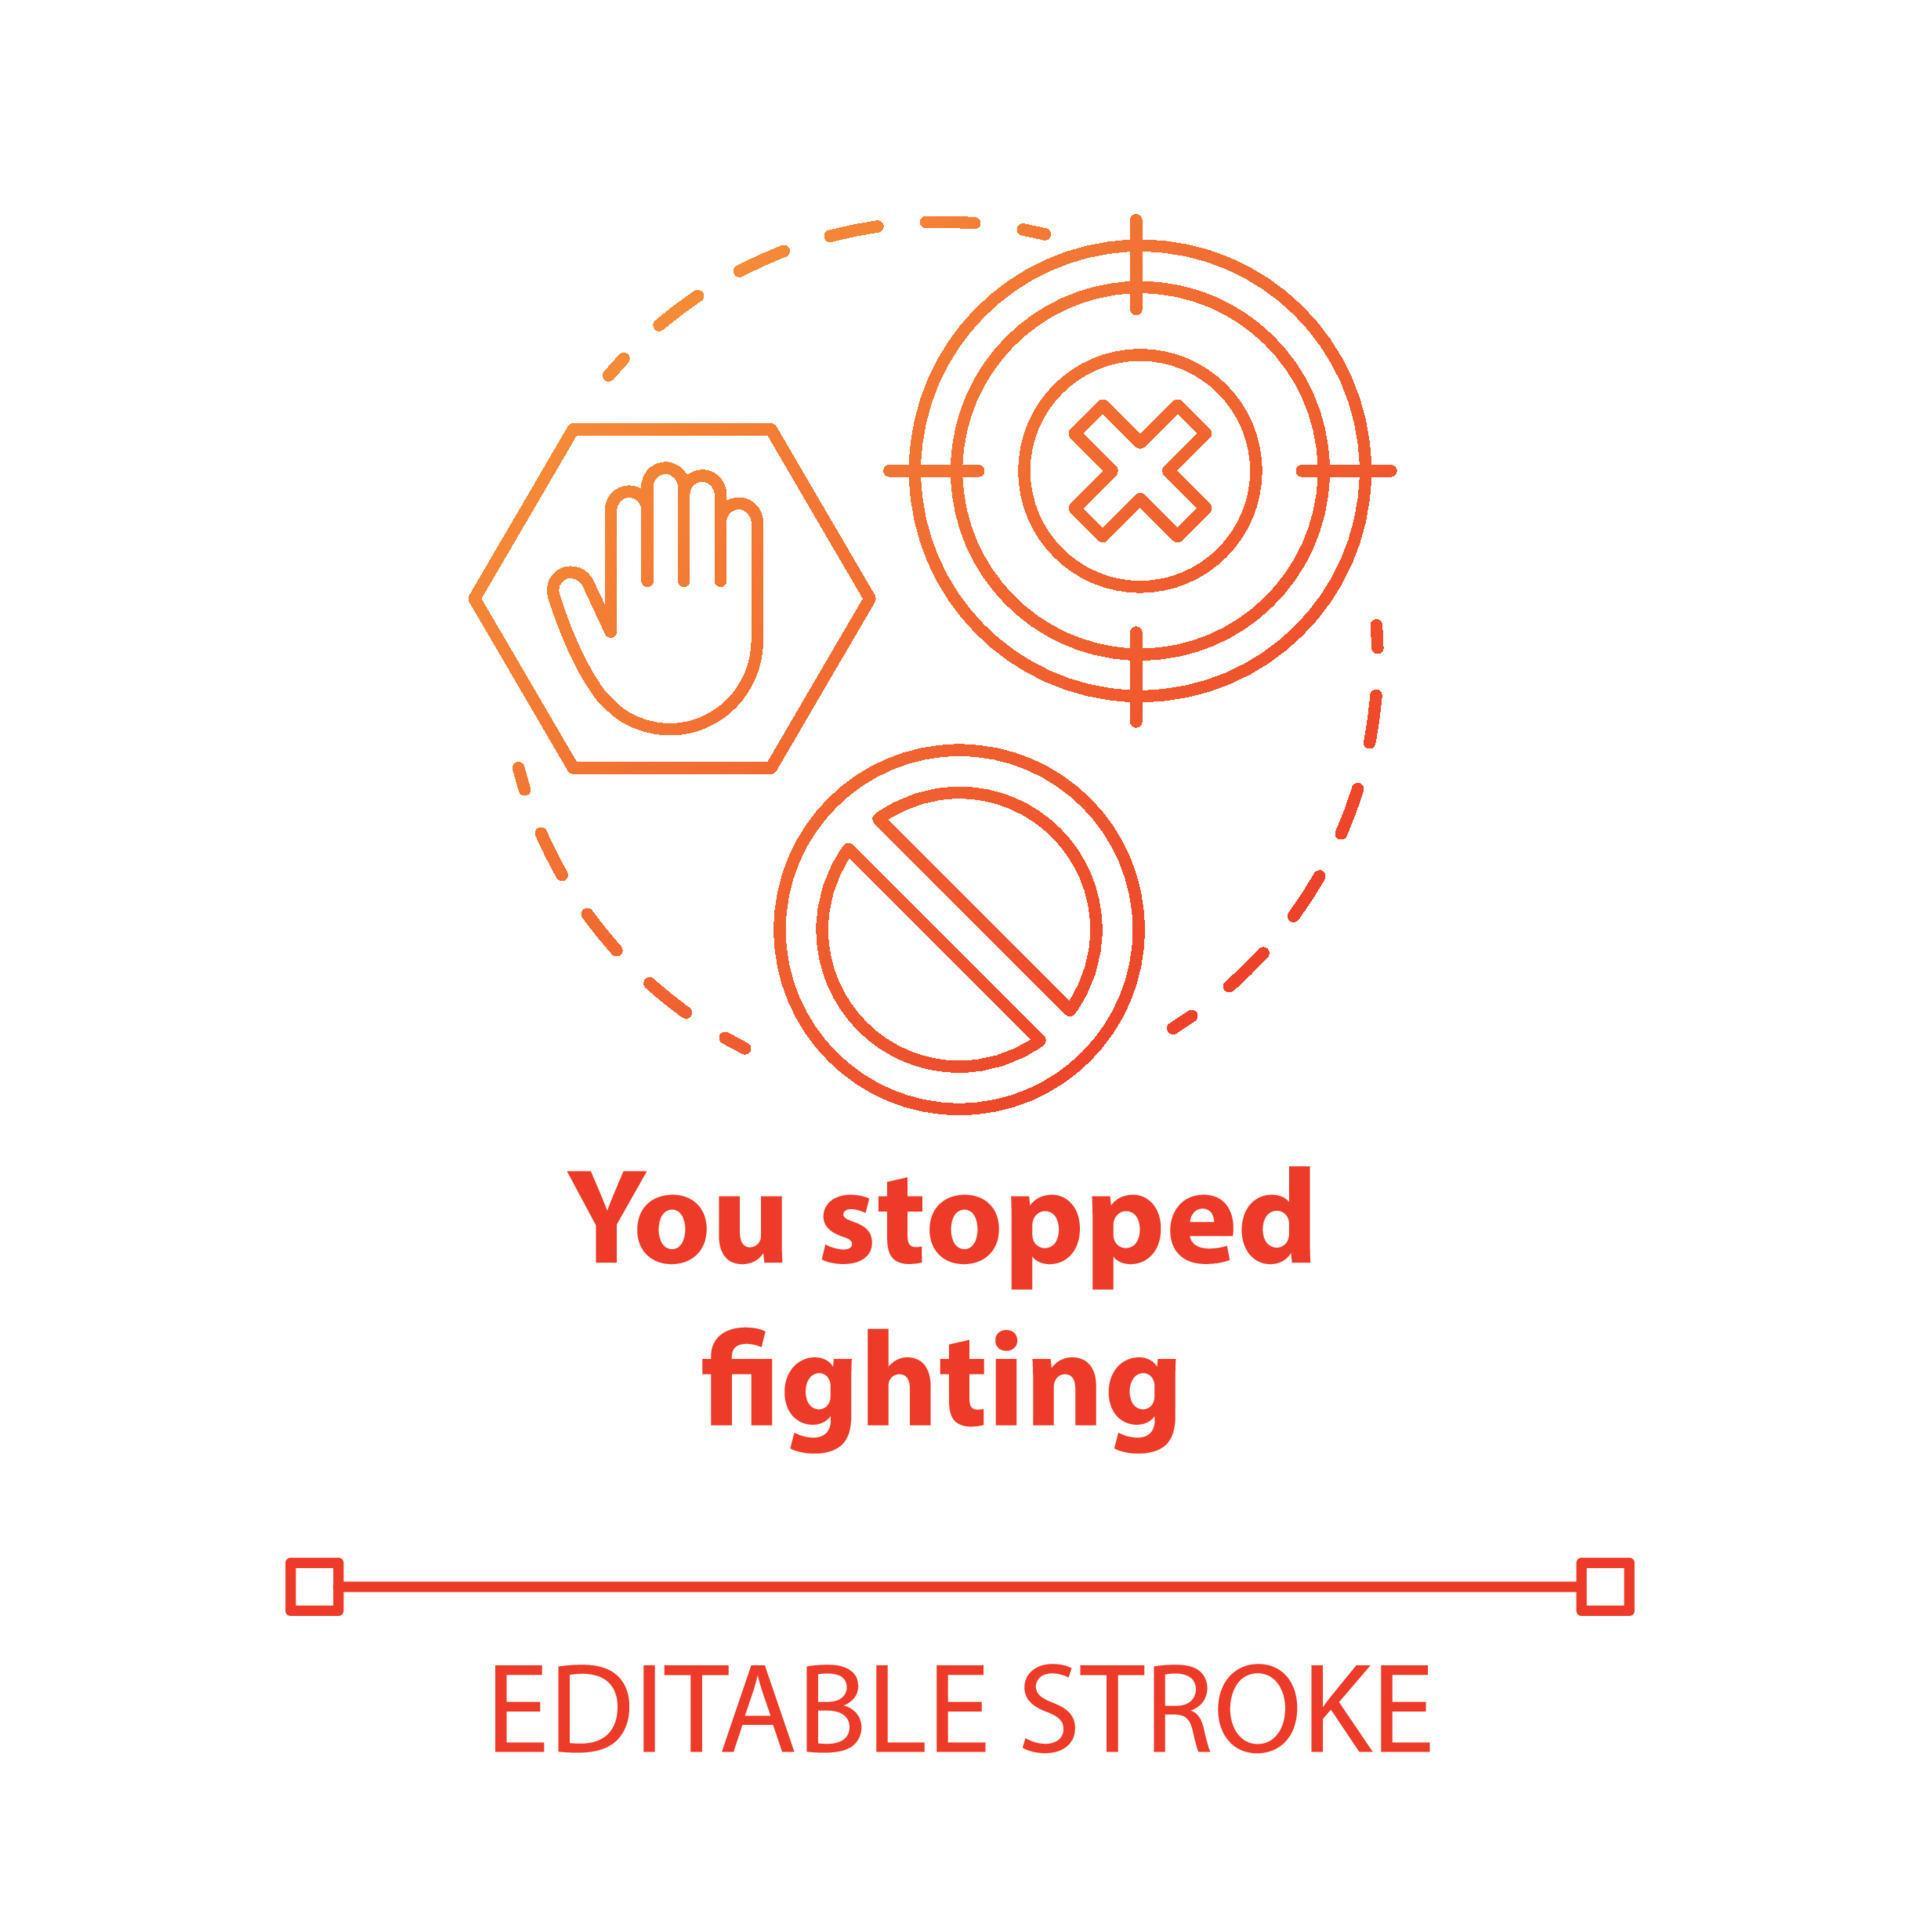 You stopped fighting concept icon. Prohibition of domestic violence ...